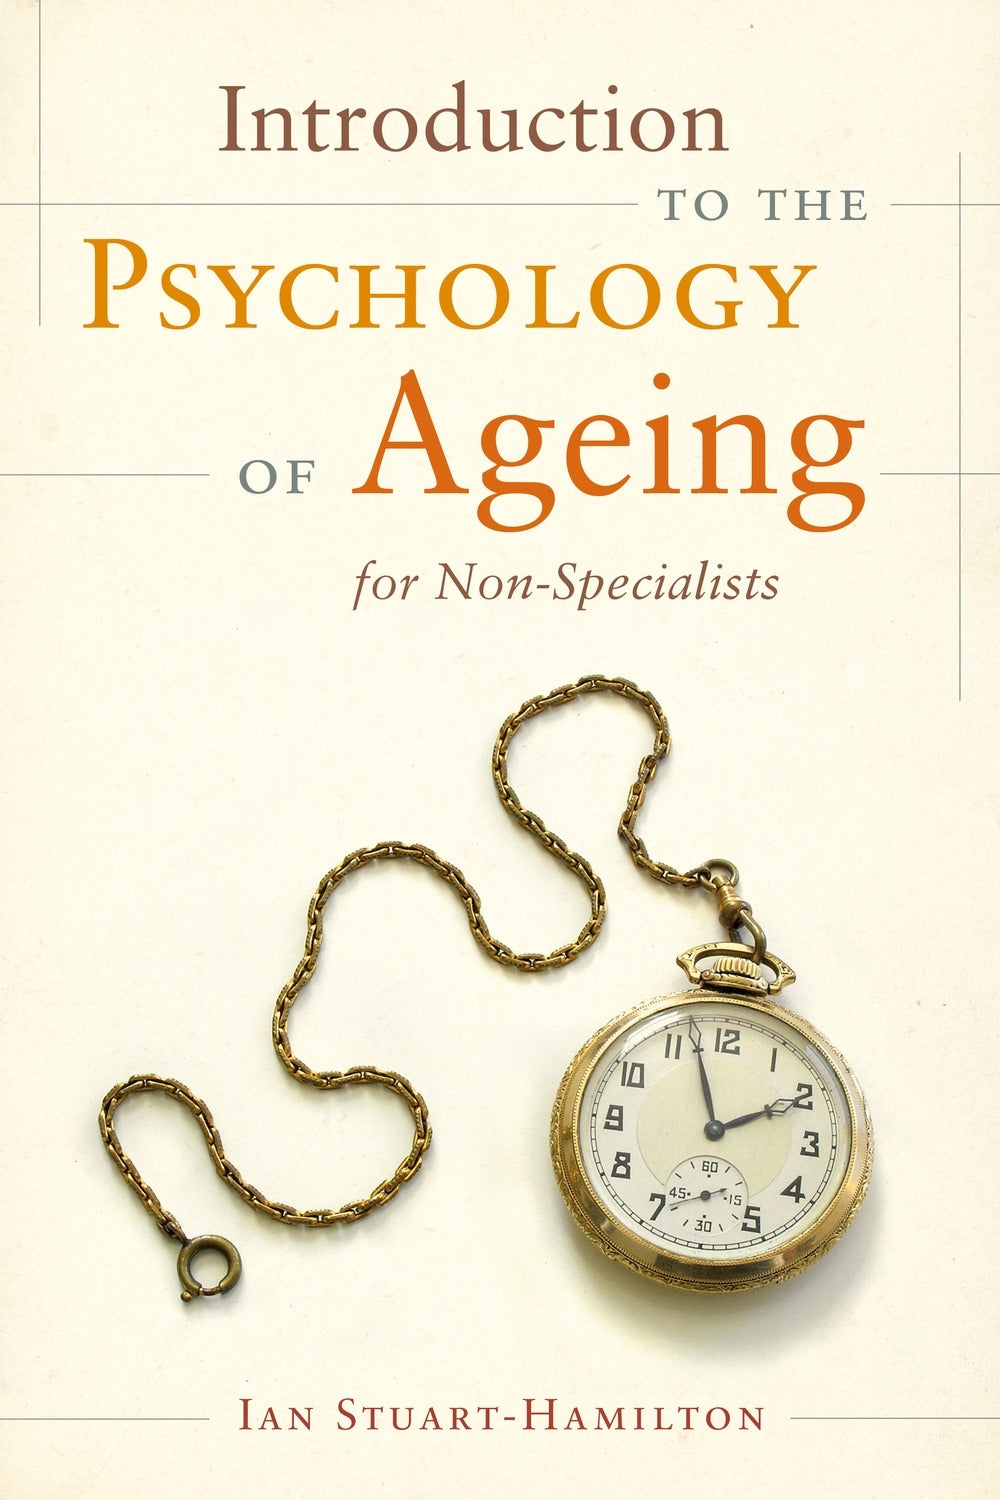 Introduction to the Psychology of Ageing for Non-Specialists by Ian Stuart-Hamilton